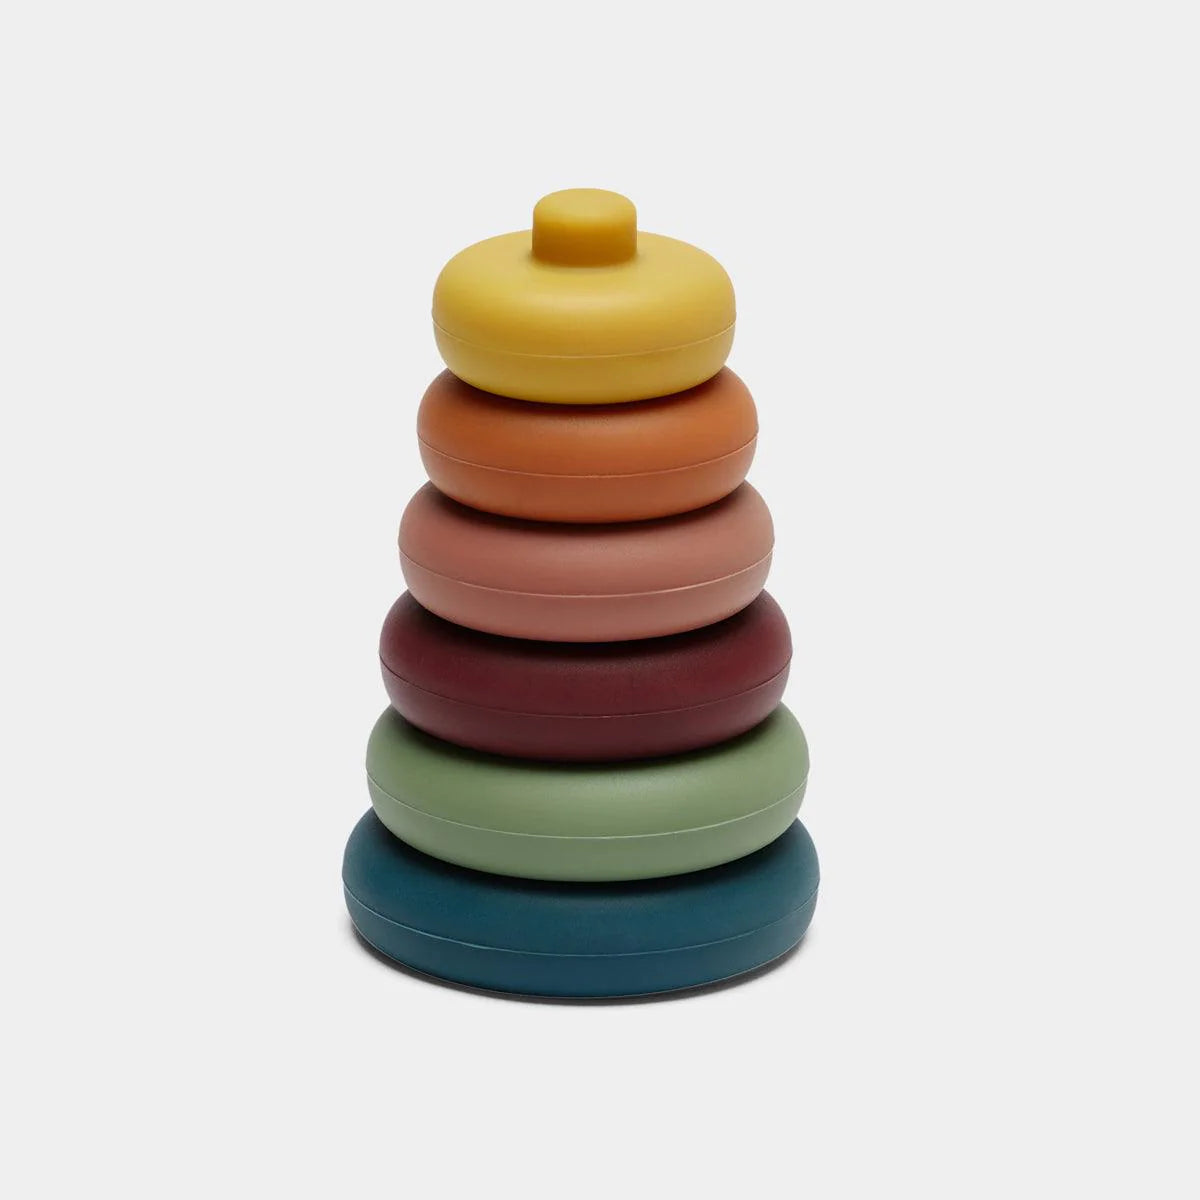 Catchy Silicone 6 Piece Stacker Set toy